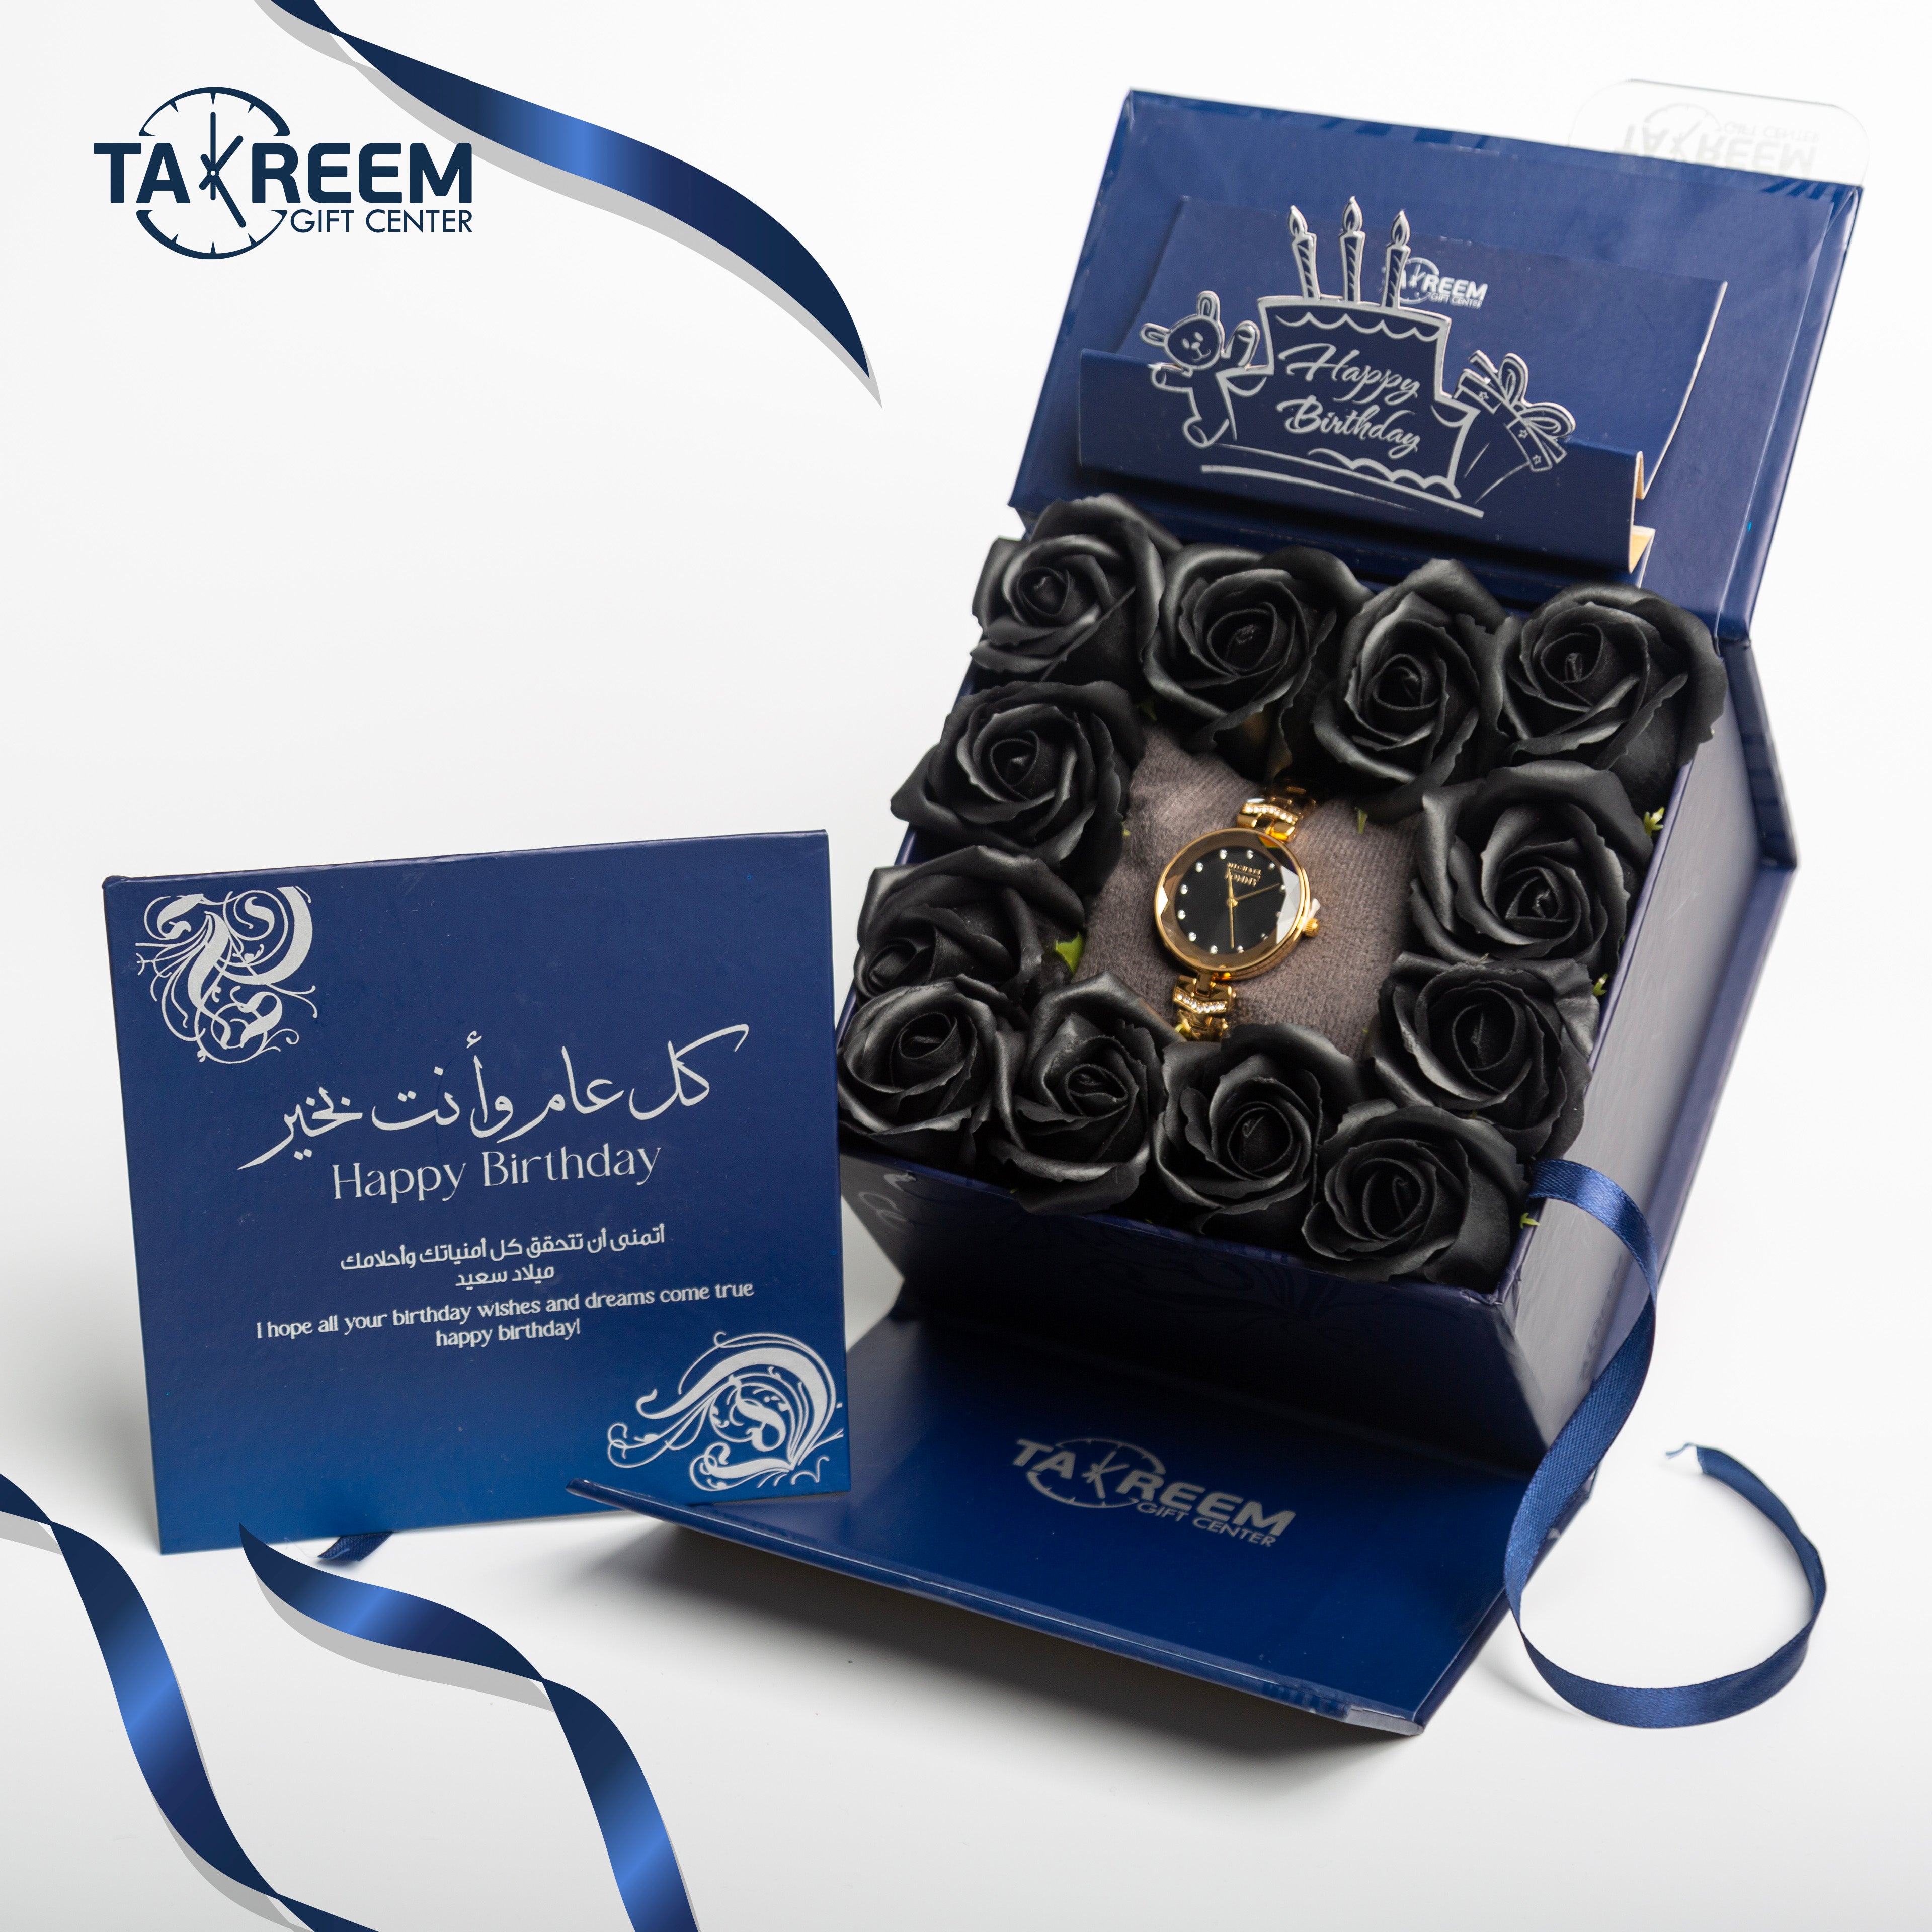 Small Smile15 Gift Boxes  By Takreem Gifts Center